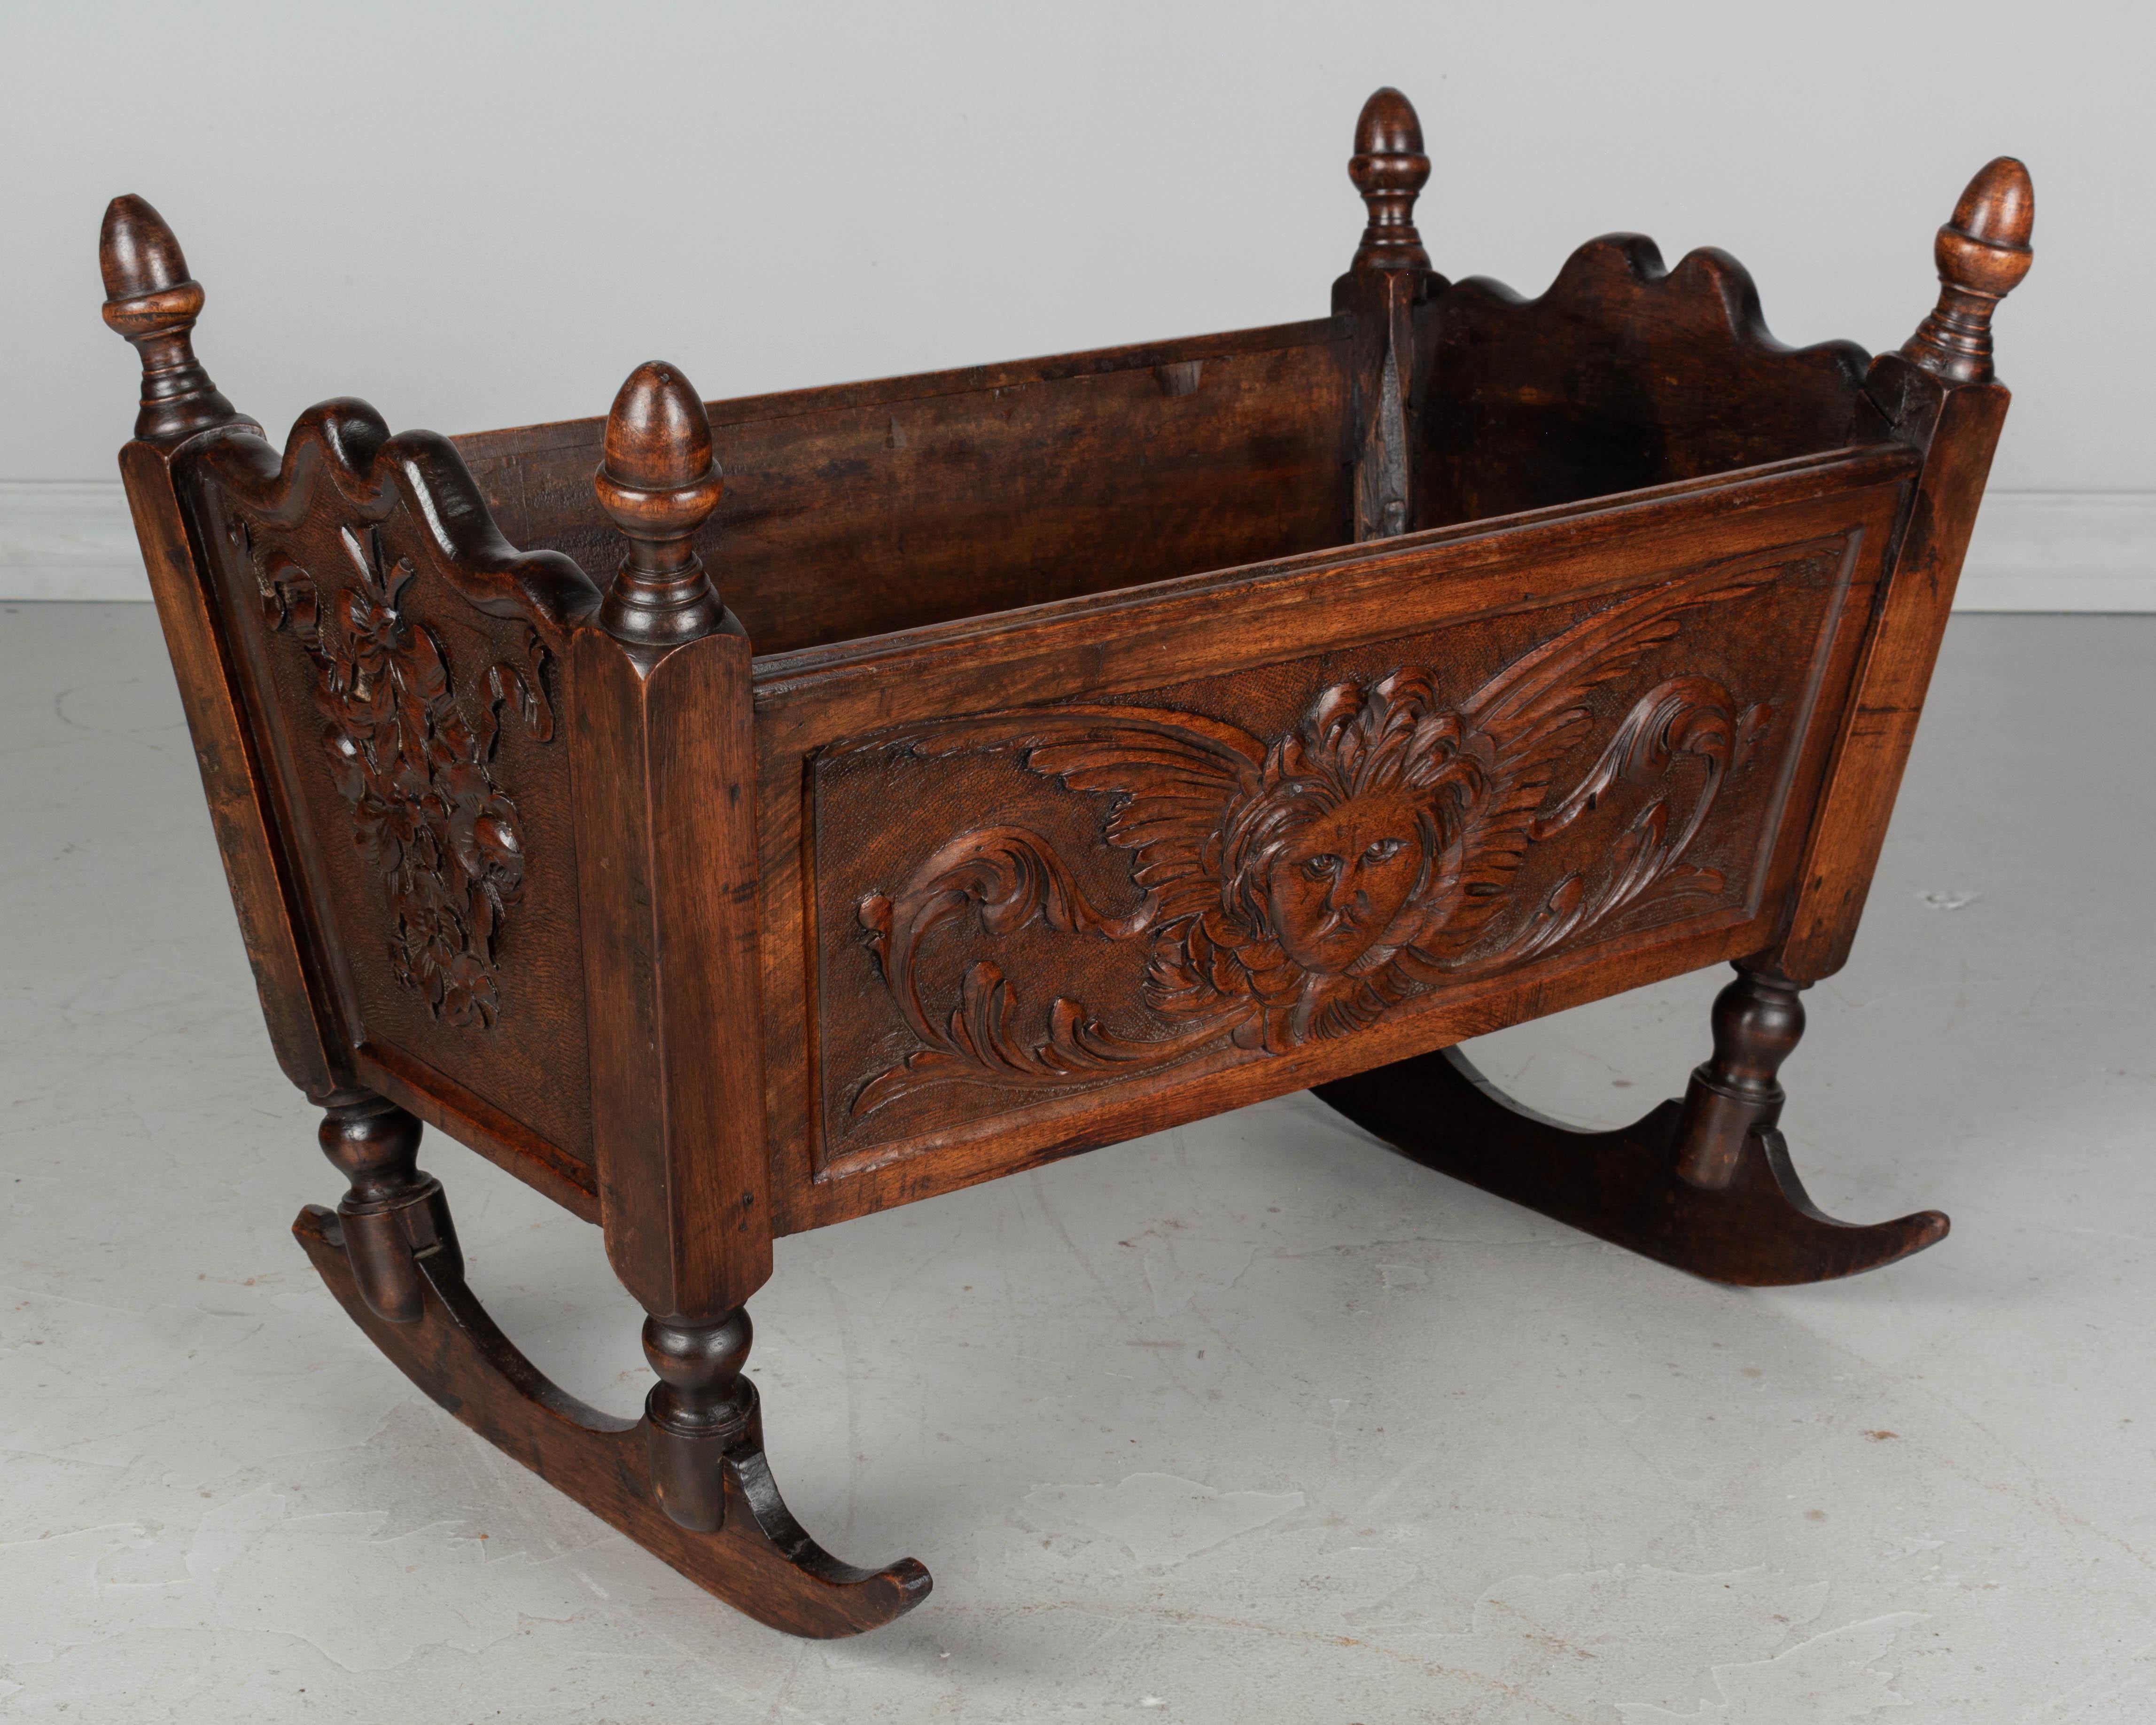 A 19th century country French baby cradle made of solid walnut with hand carved putti on both side panels and charming flower bouquets with ribbons carved on the ends. Accented with turned finials. May be used for dolls or converted into a planter